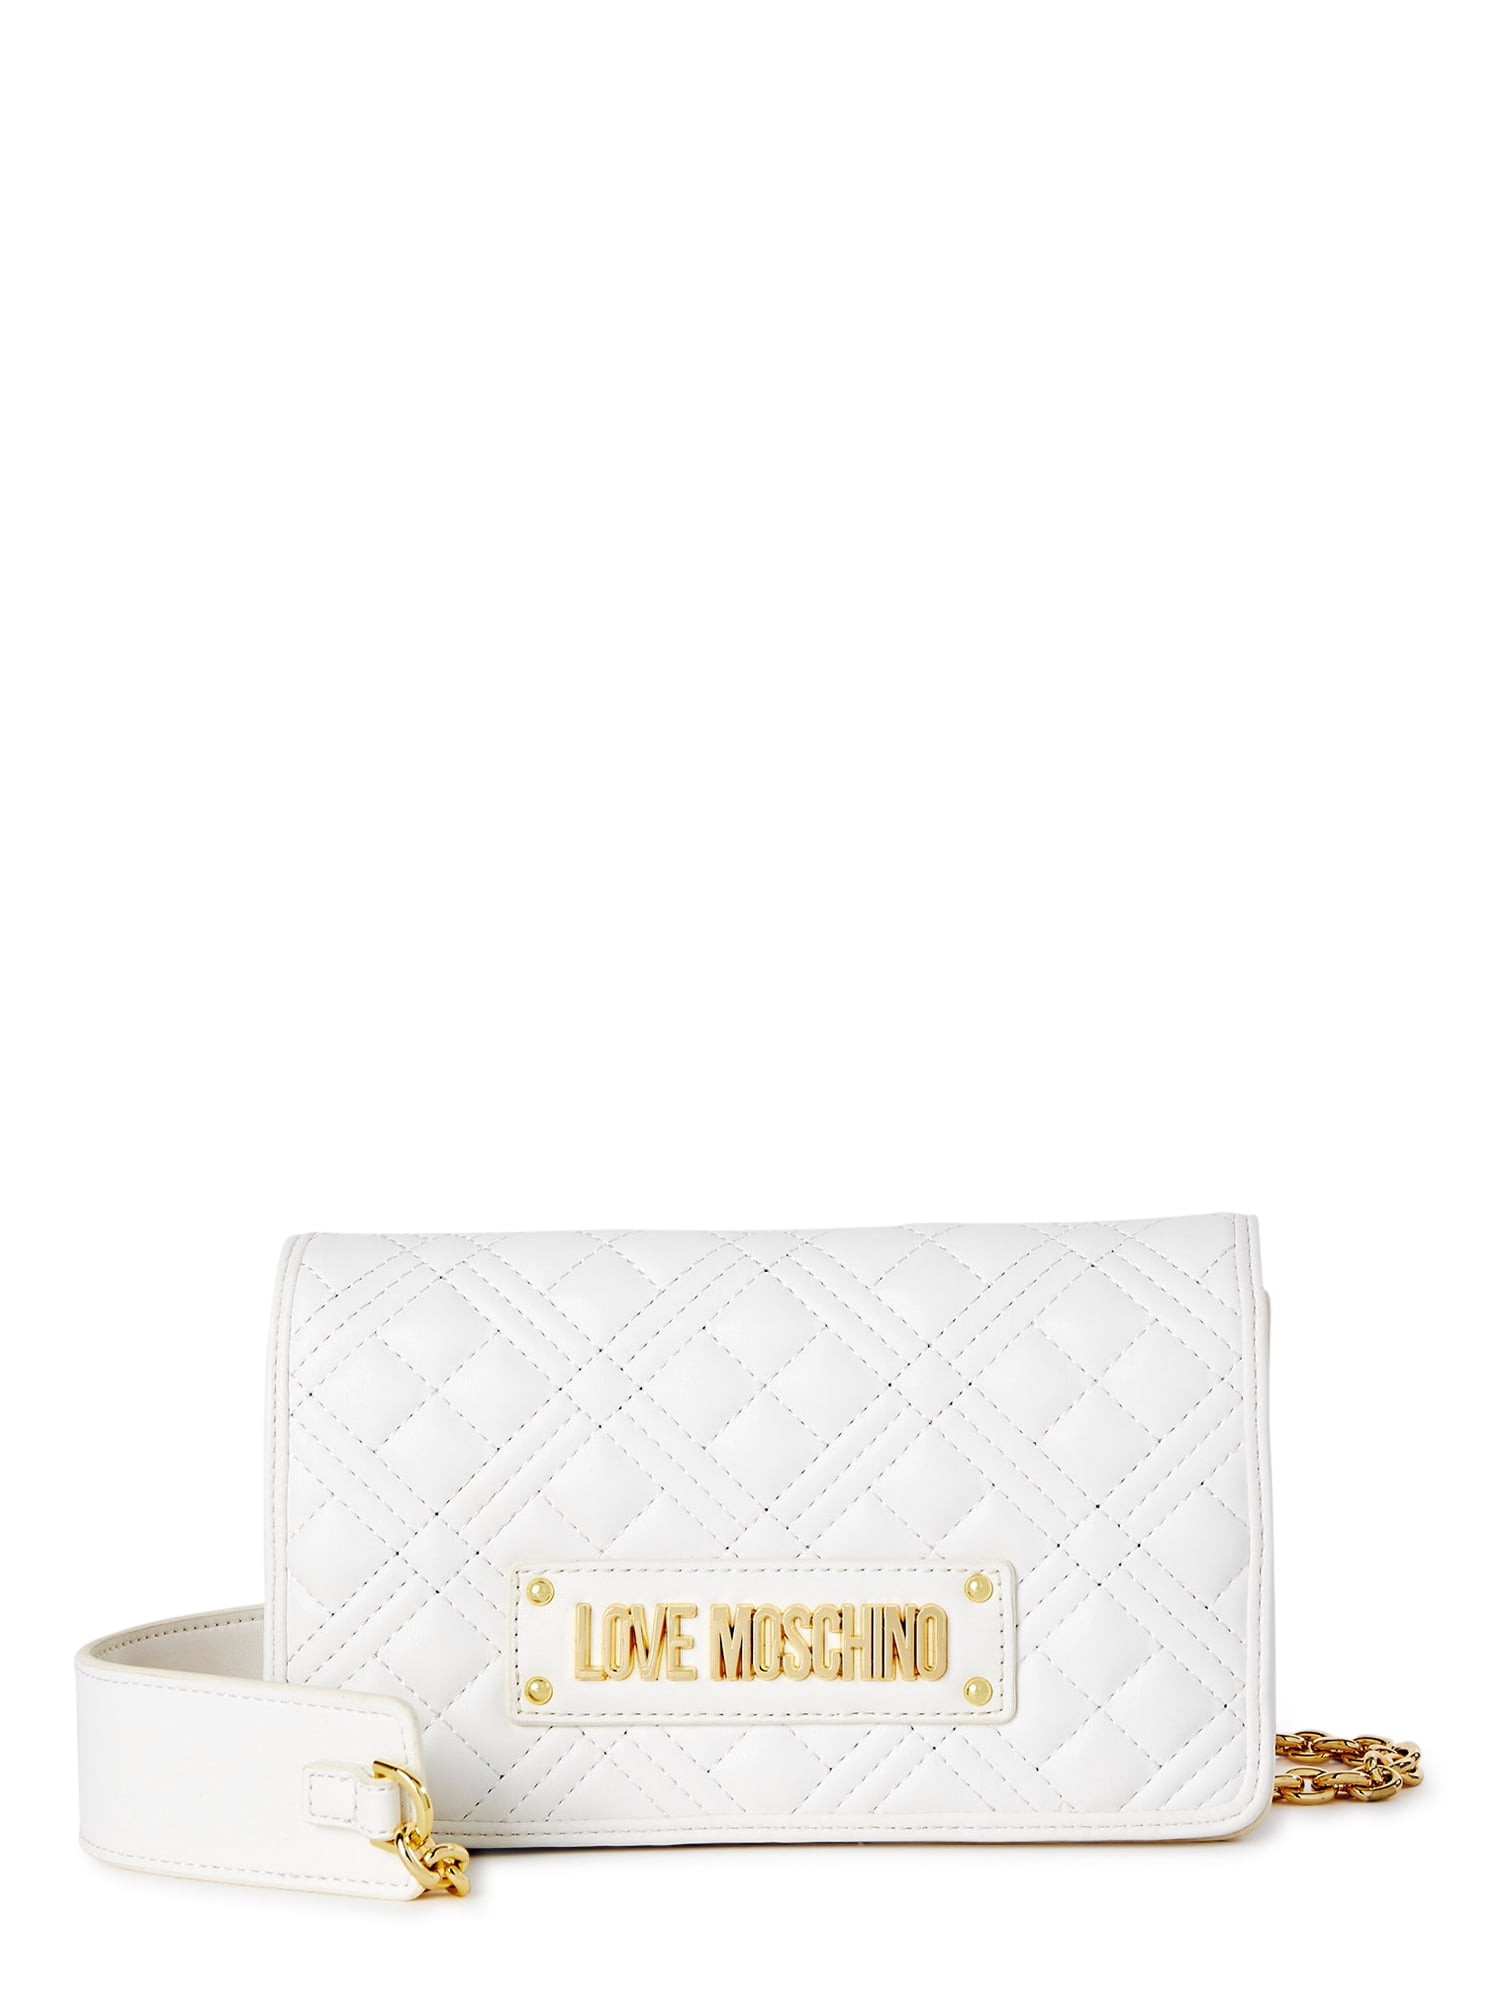 ozon Mus Outlook Love Moschino Women's Quilted White Crossbody Bag - Walmart.com